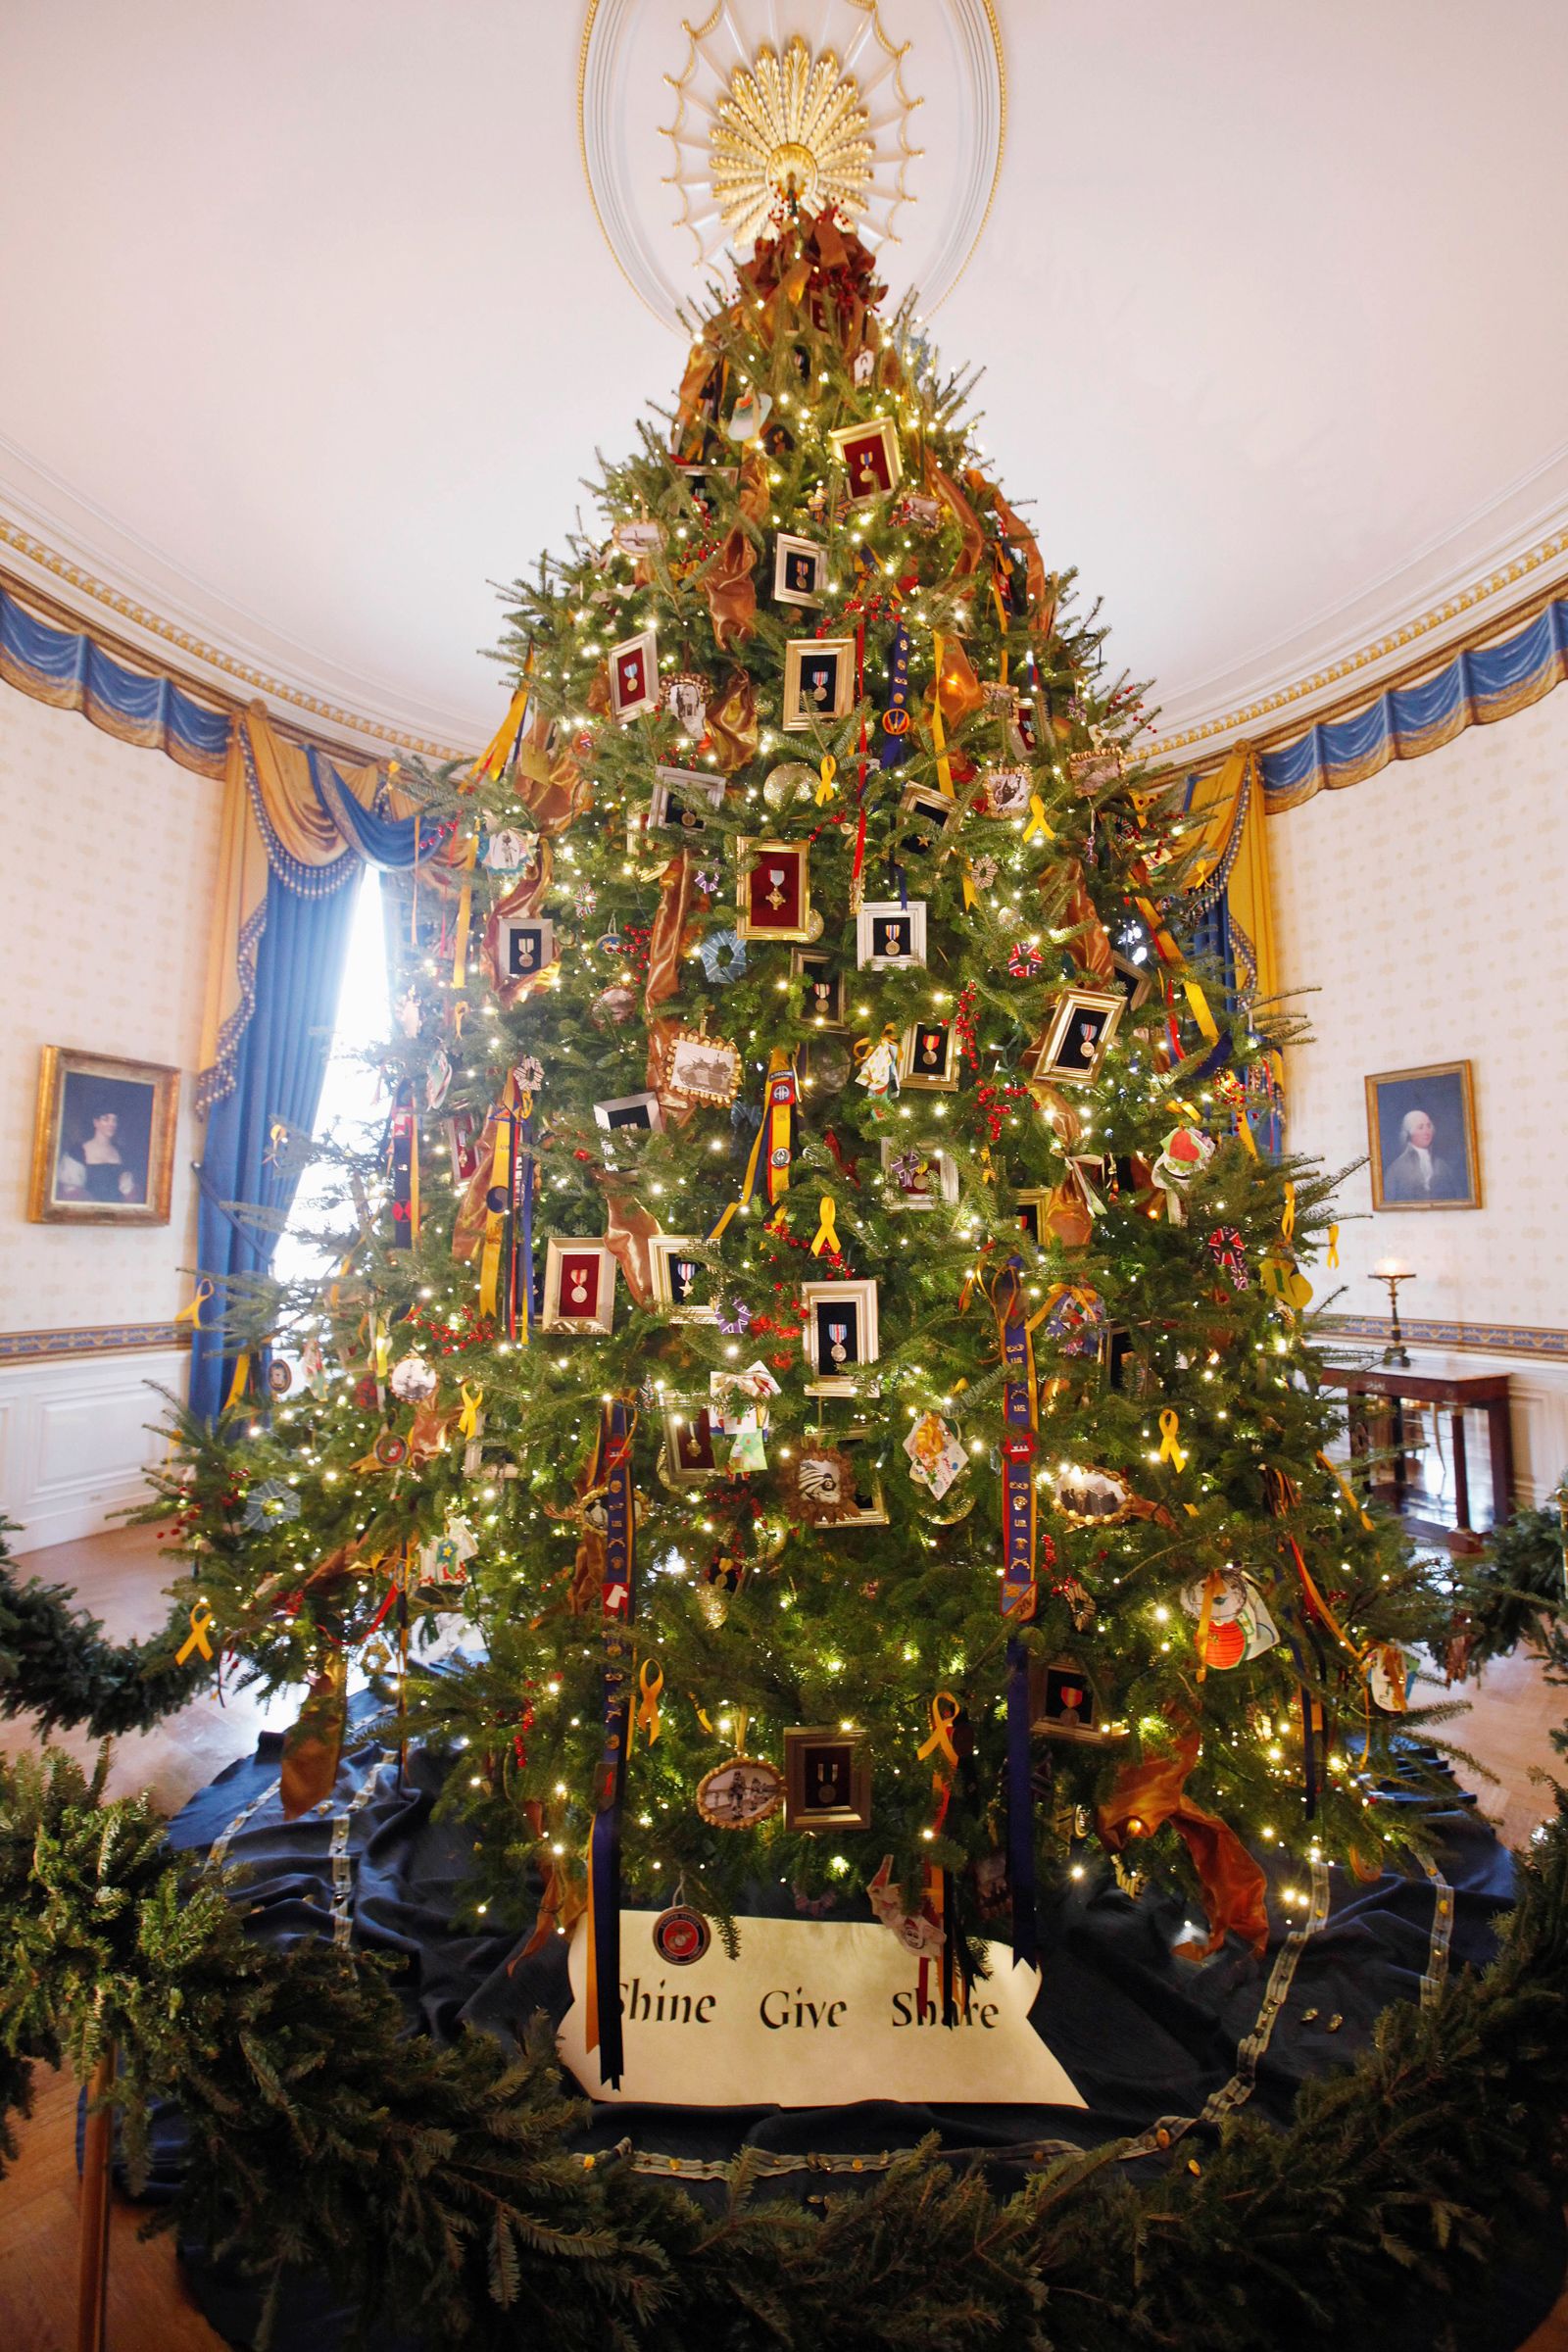 The White House Christmas Tree is seen during a press preview, Wednesday Nov. 30, 2011, in the Blue Room of the White House in Washington. The tree, whose theme is "Shine, Give, Share" honors military families. (AP Photo/Charles Dharapak)